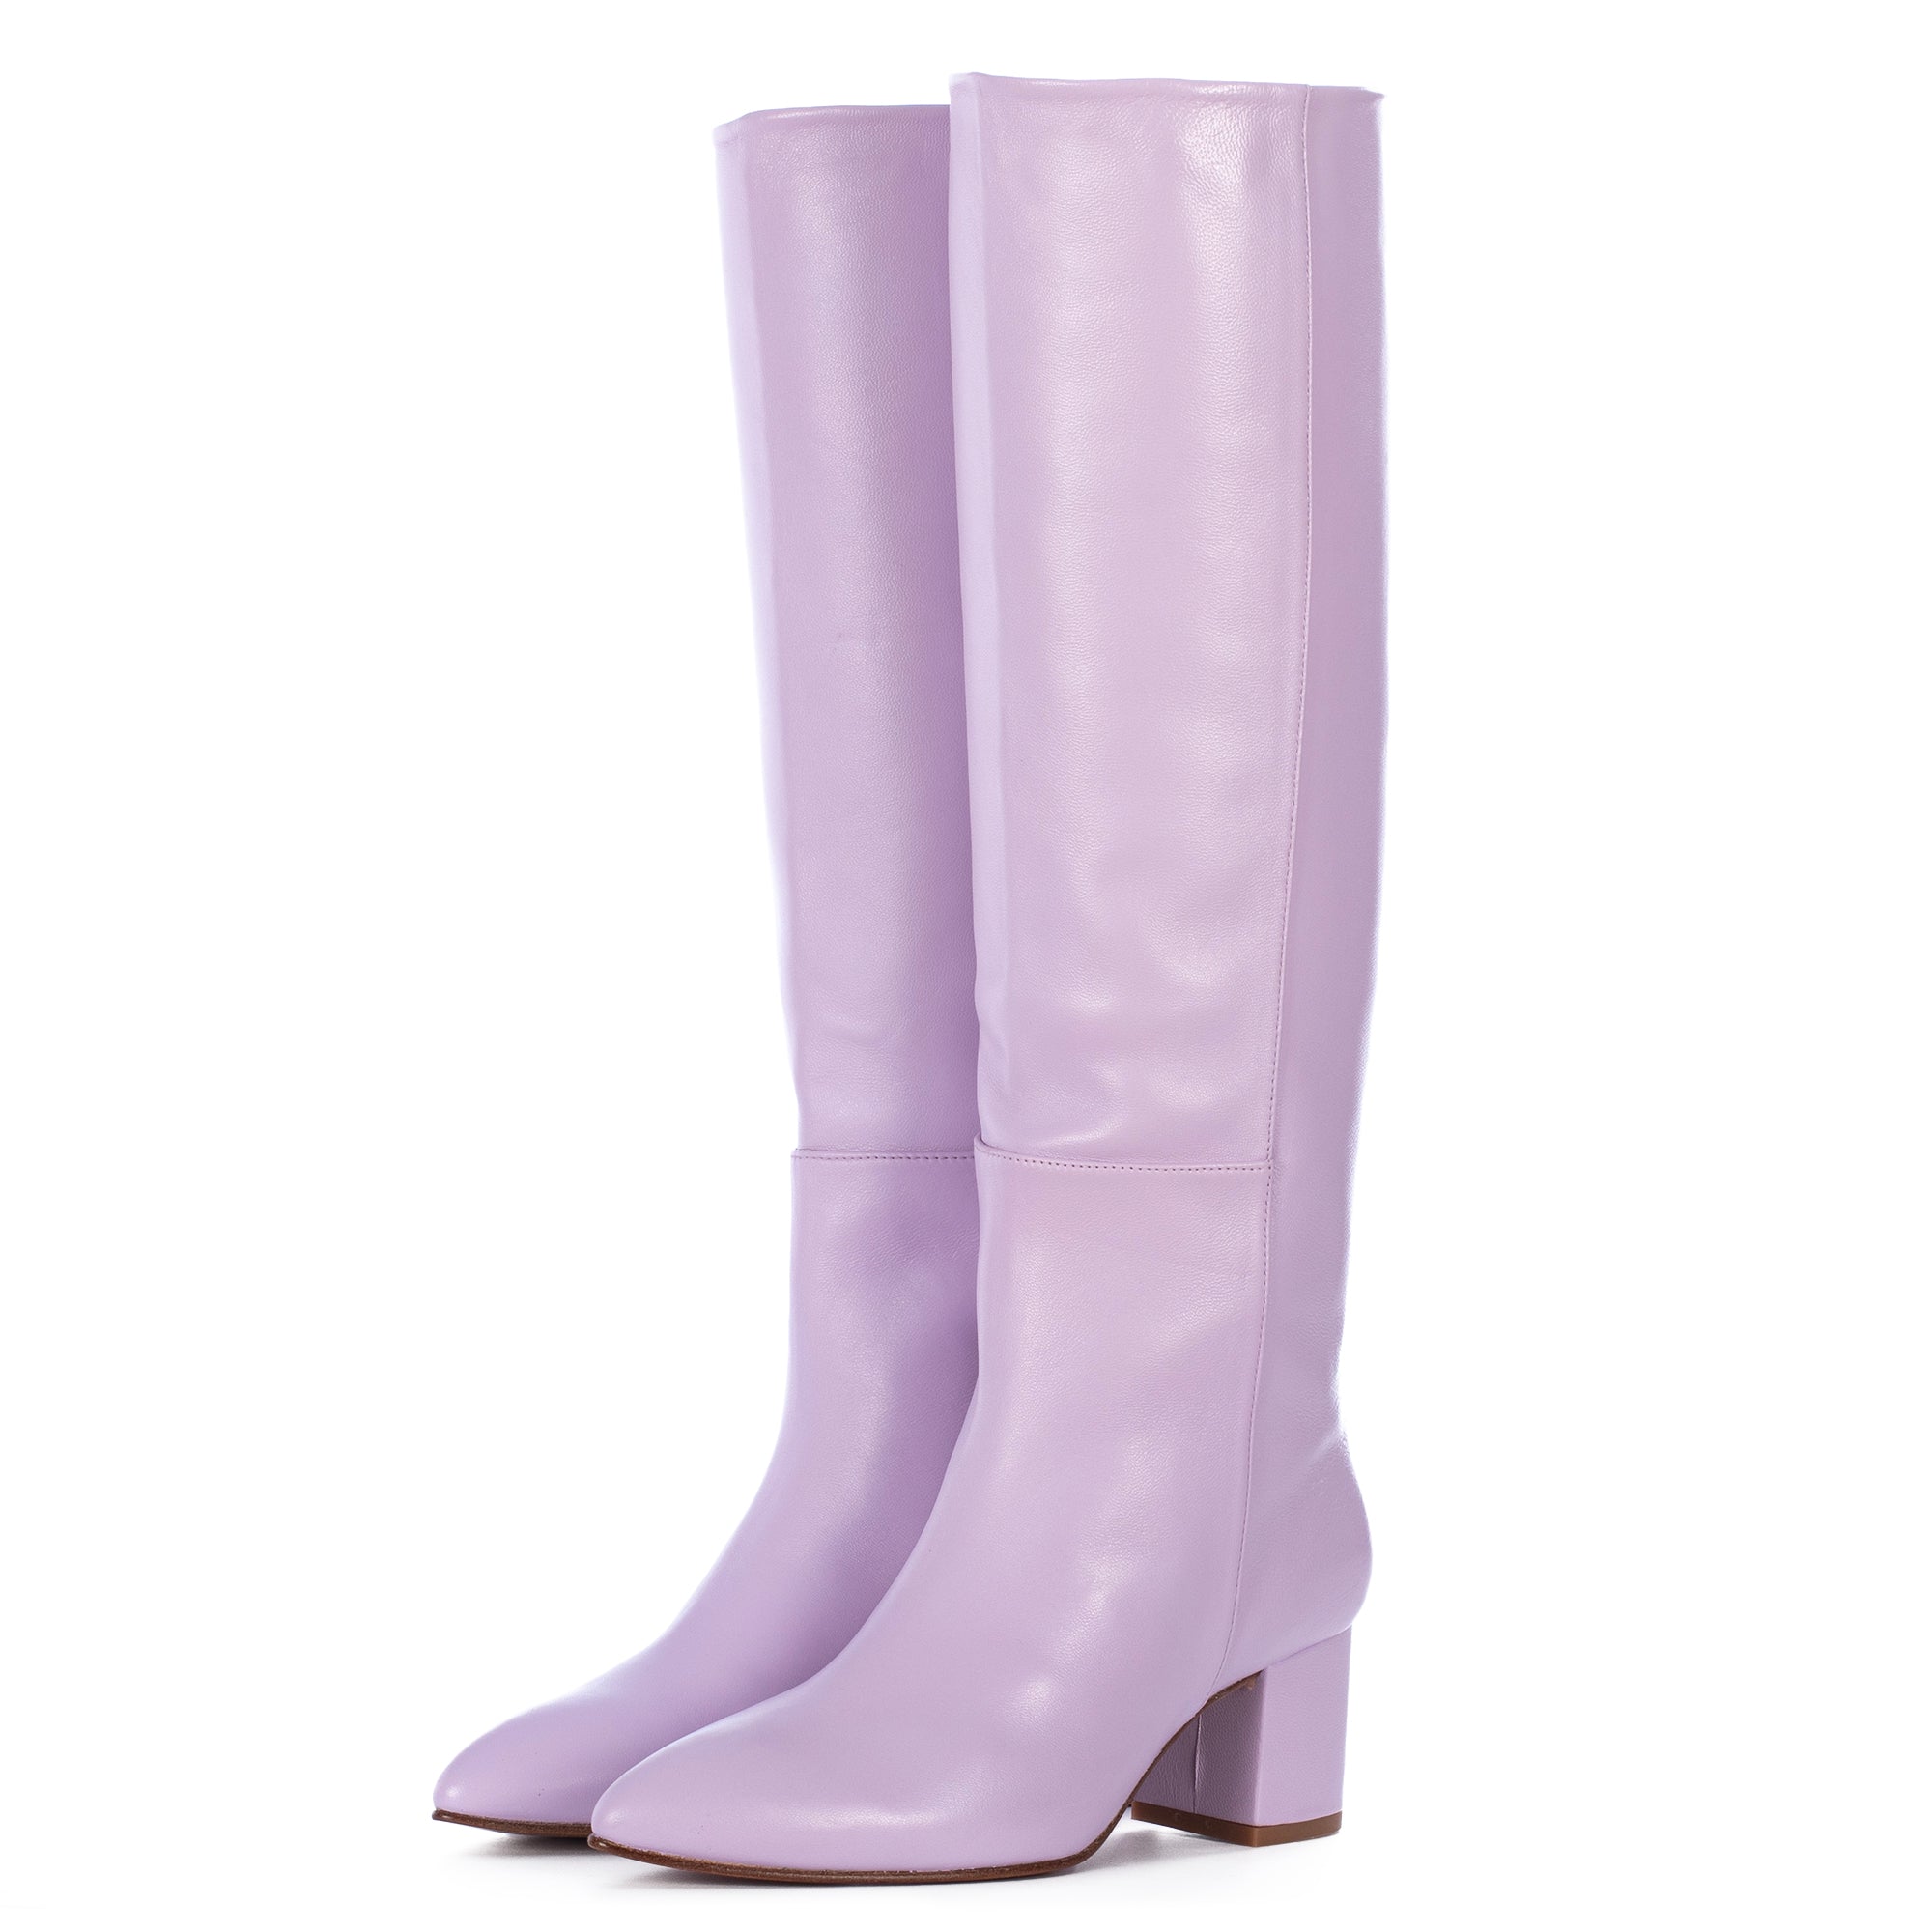 MAUVE LEATHER TALL BOOTS